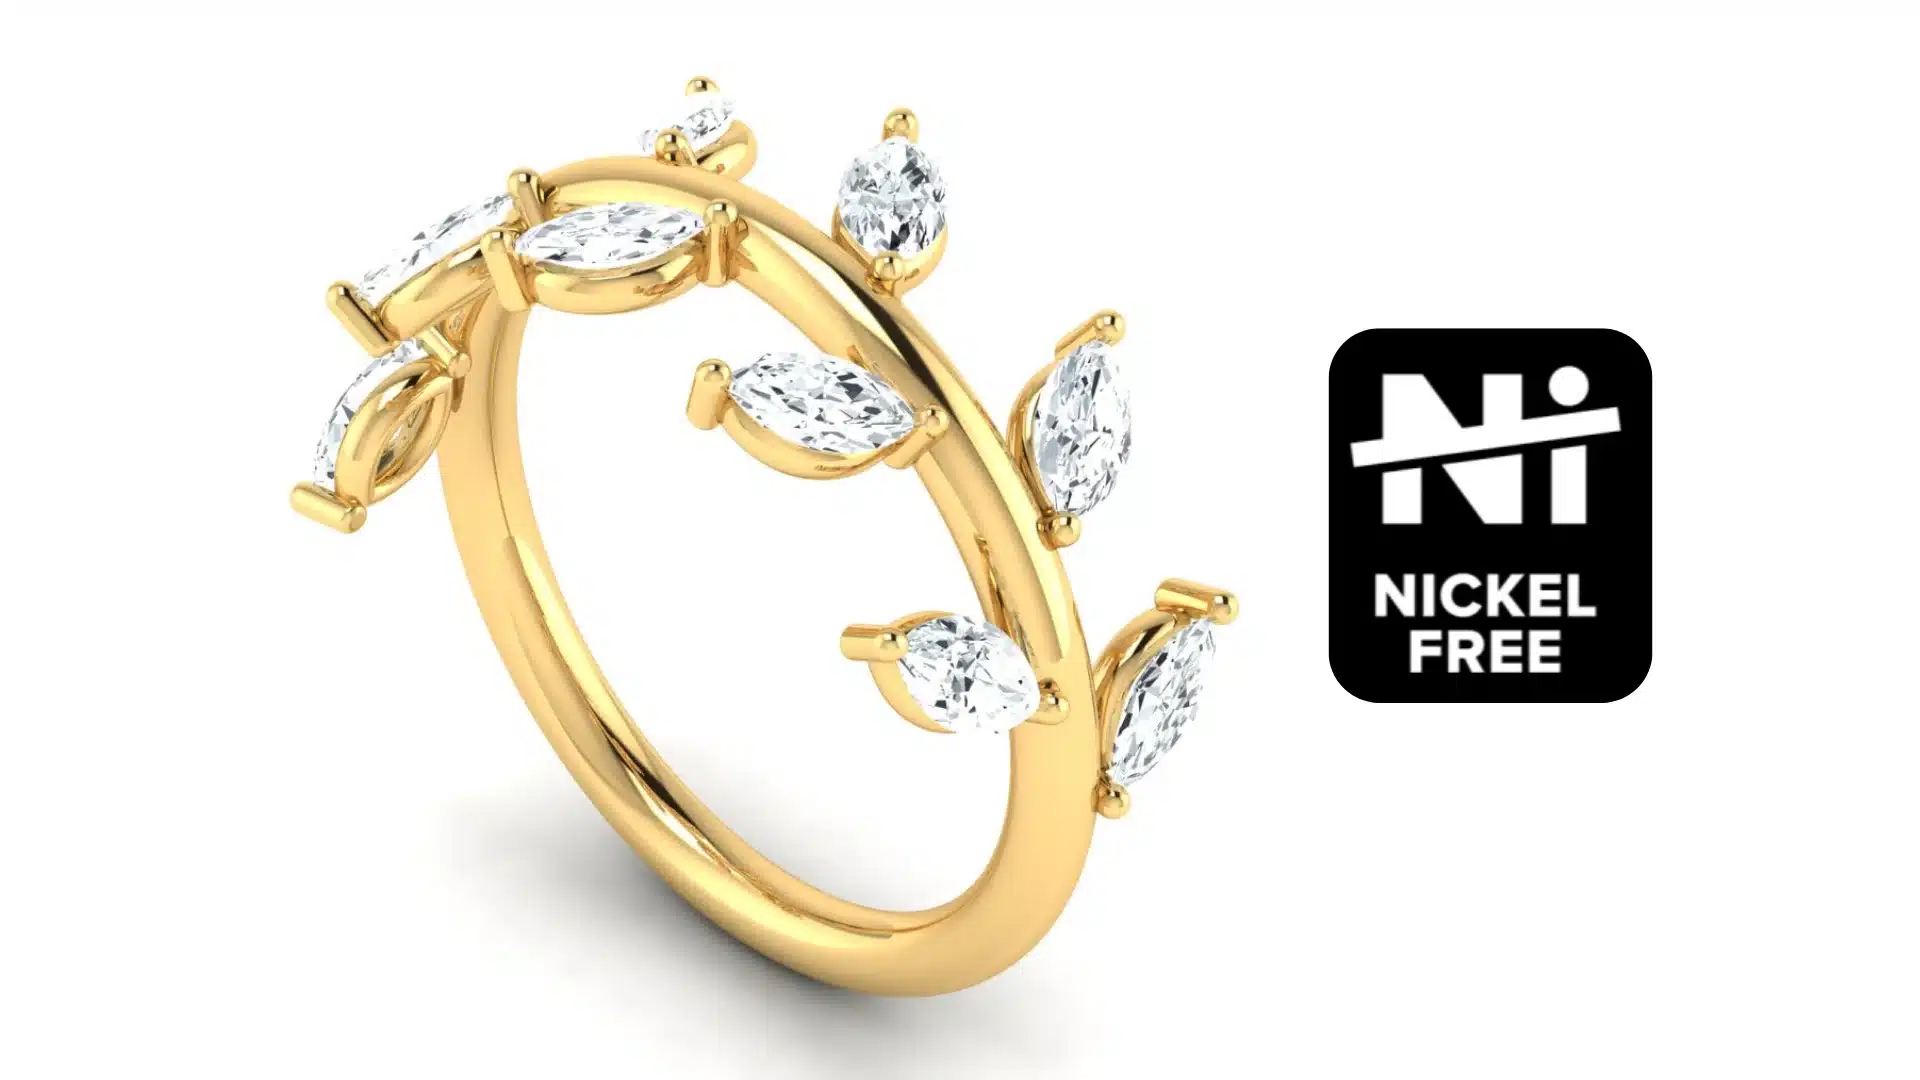 Advertisement for nickel-free jewelry showcasing various stylish designs.